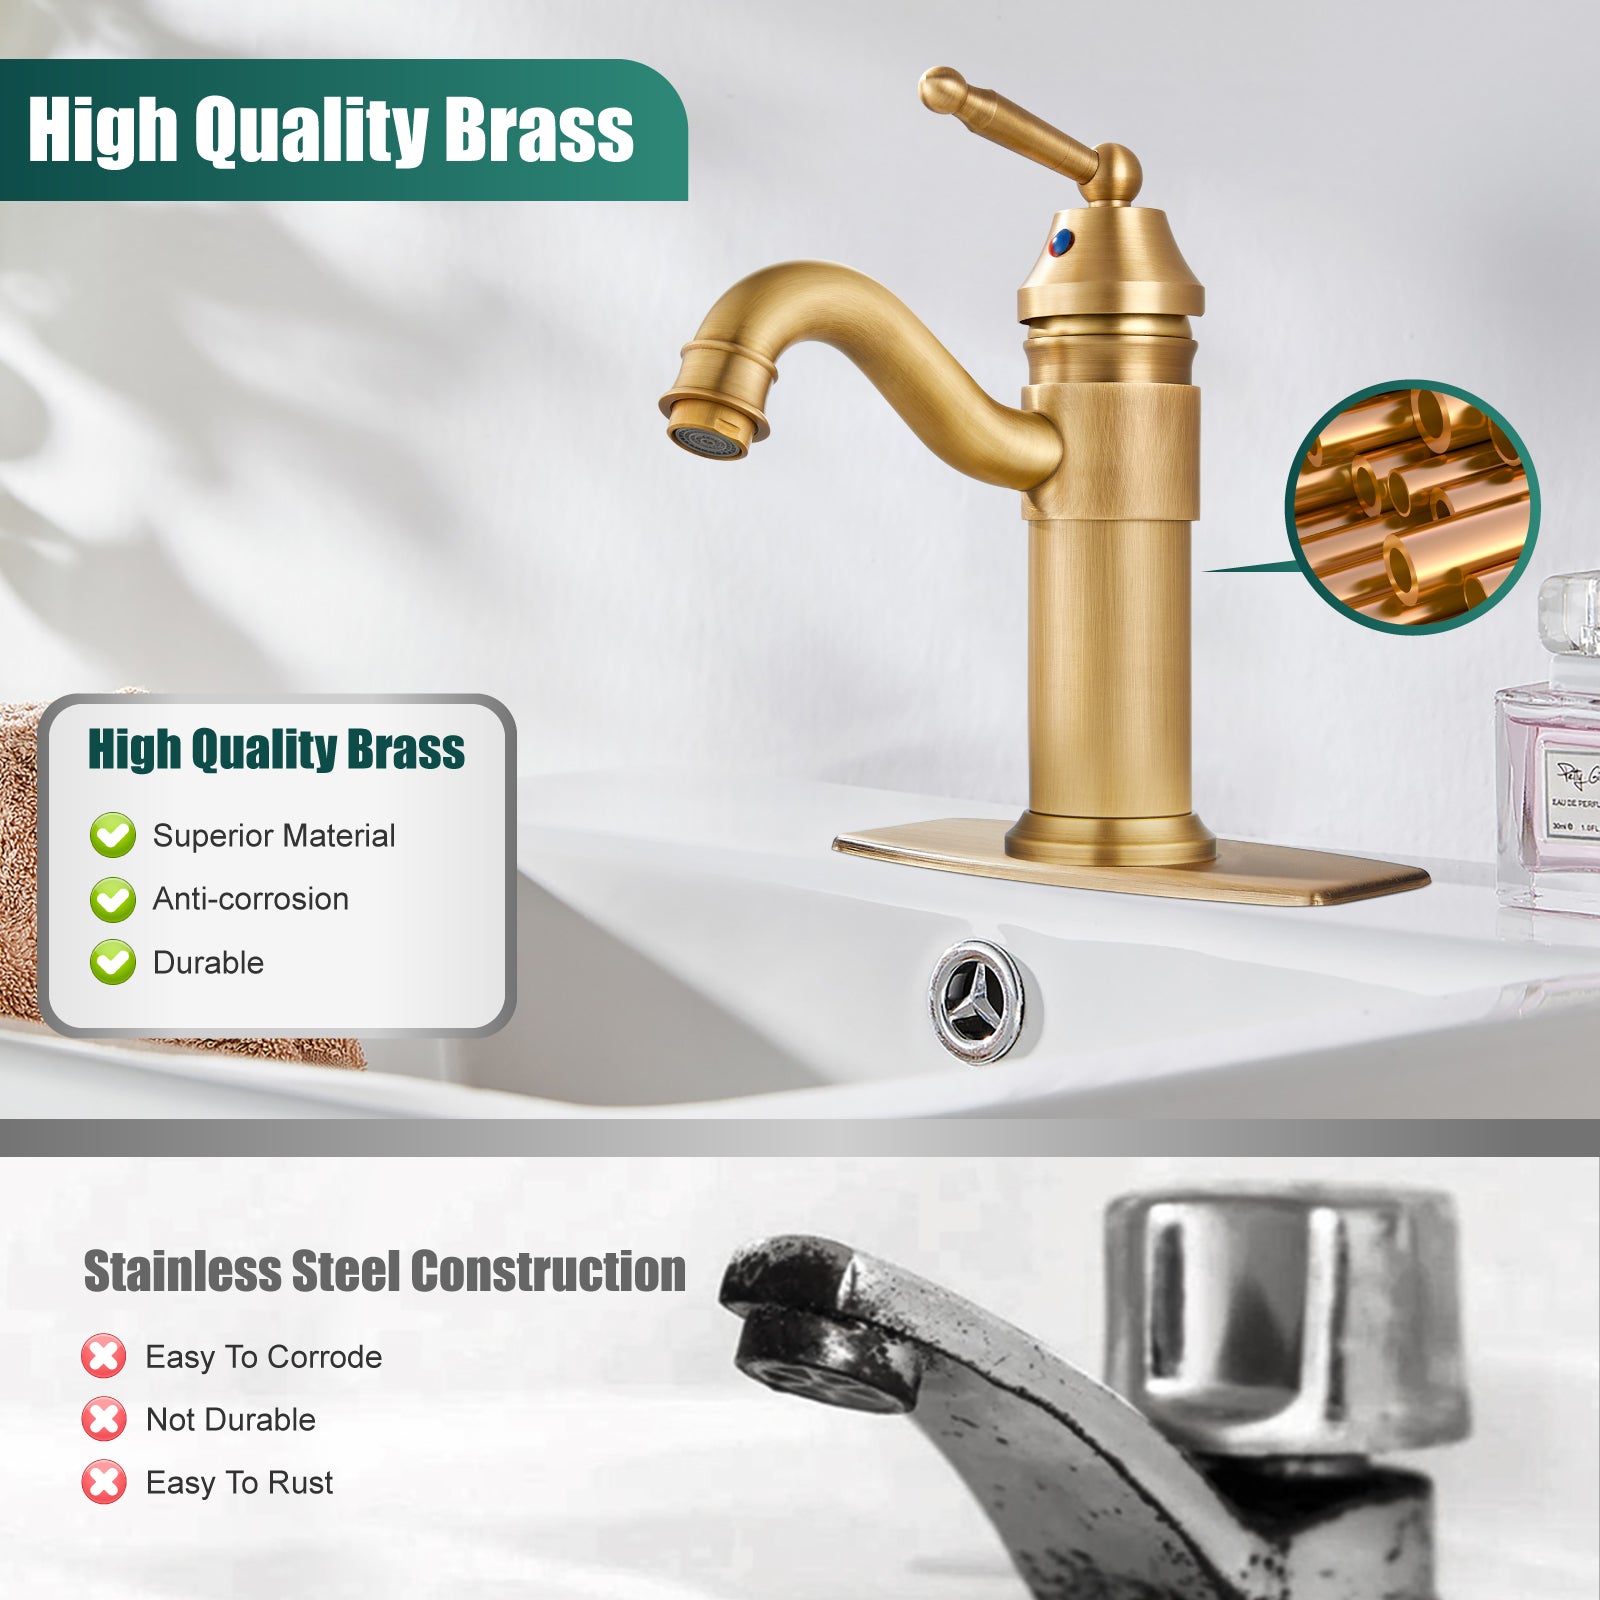 Heyalan Bathroom Sink Faucet Brass One Hole Single Handle Lavatory Fixture Deck Mounted Vanity Vessel Mixer Tap Pop Up Drain Included Hot and Cold Water